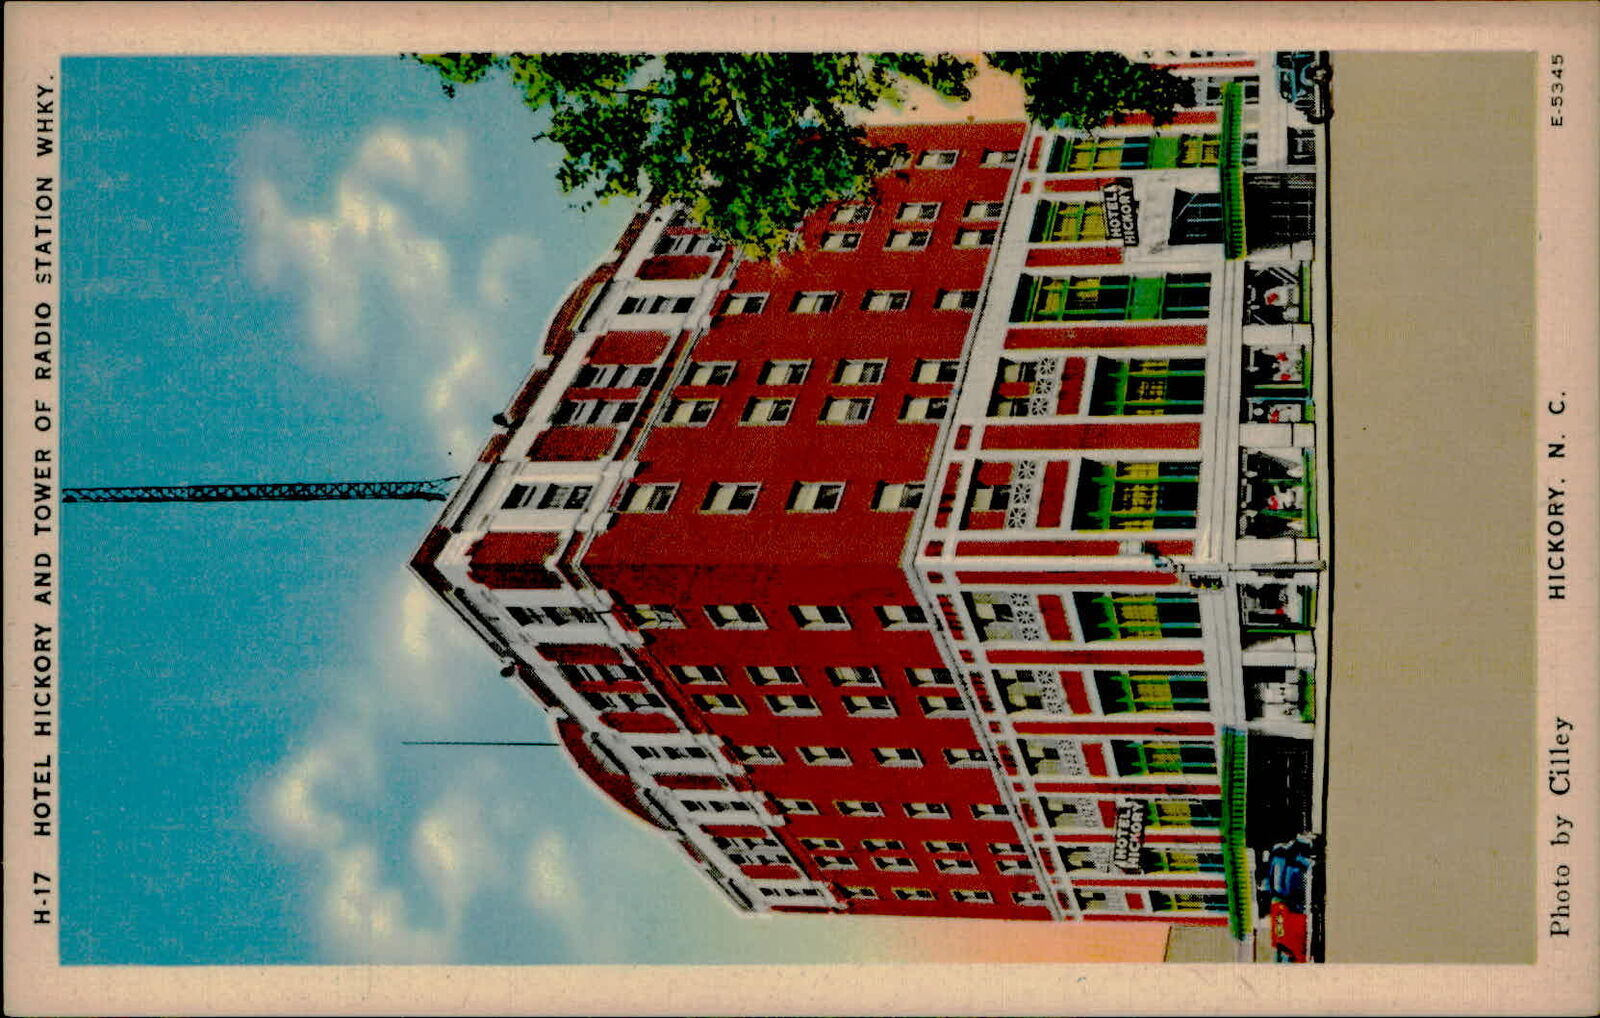 Postcard: H-17 HOTEL HICKORY AND TOWER OF RADIO STATION WHKY. F FB B H